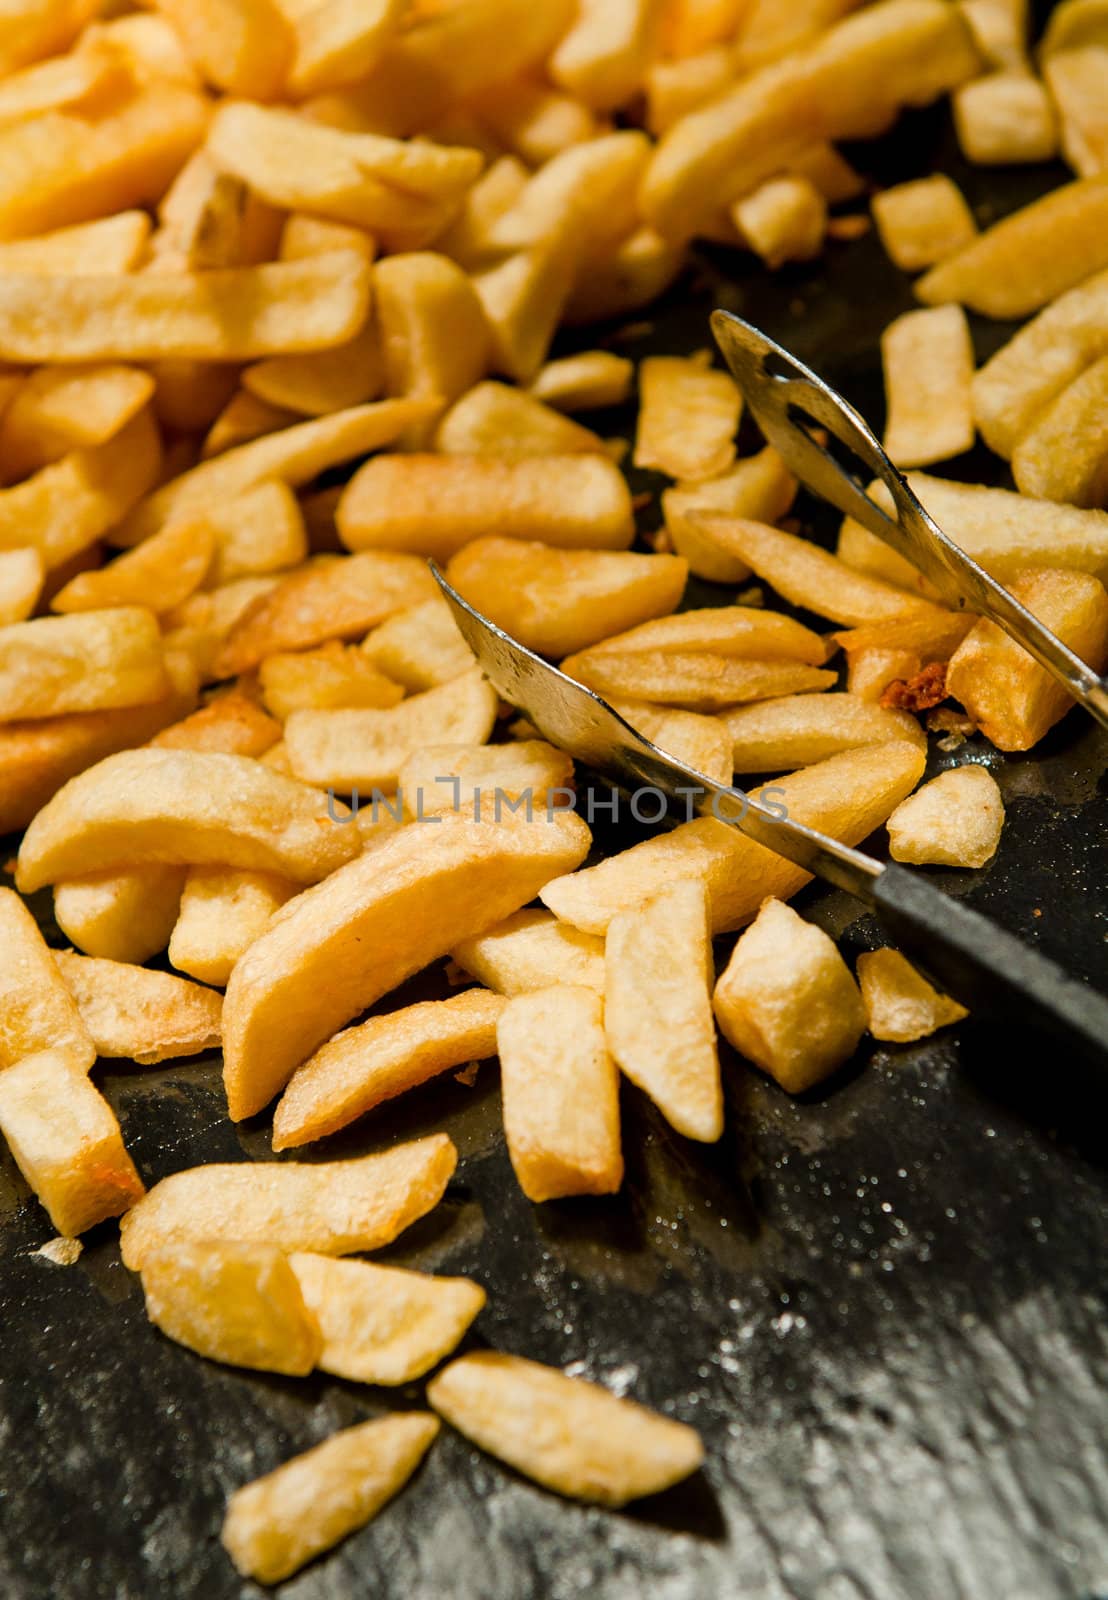 French fries by luissantos84